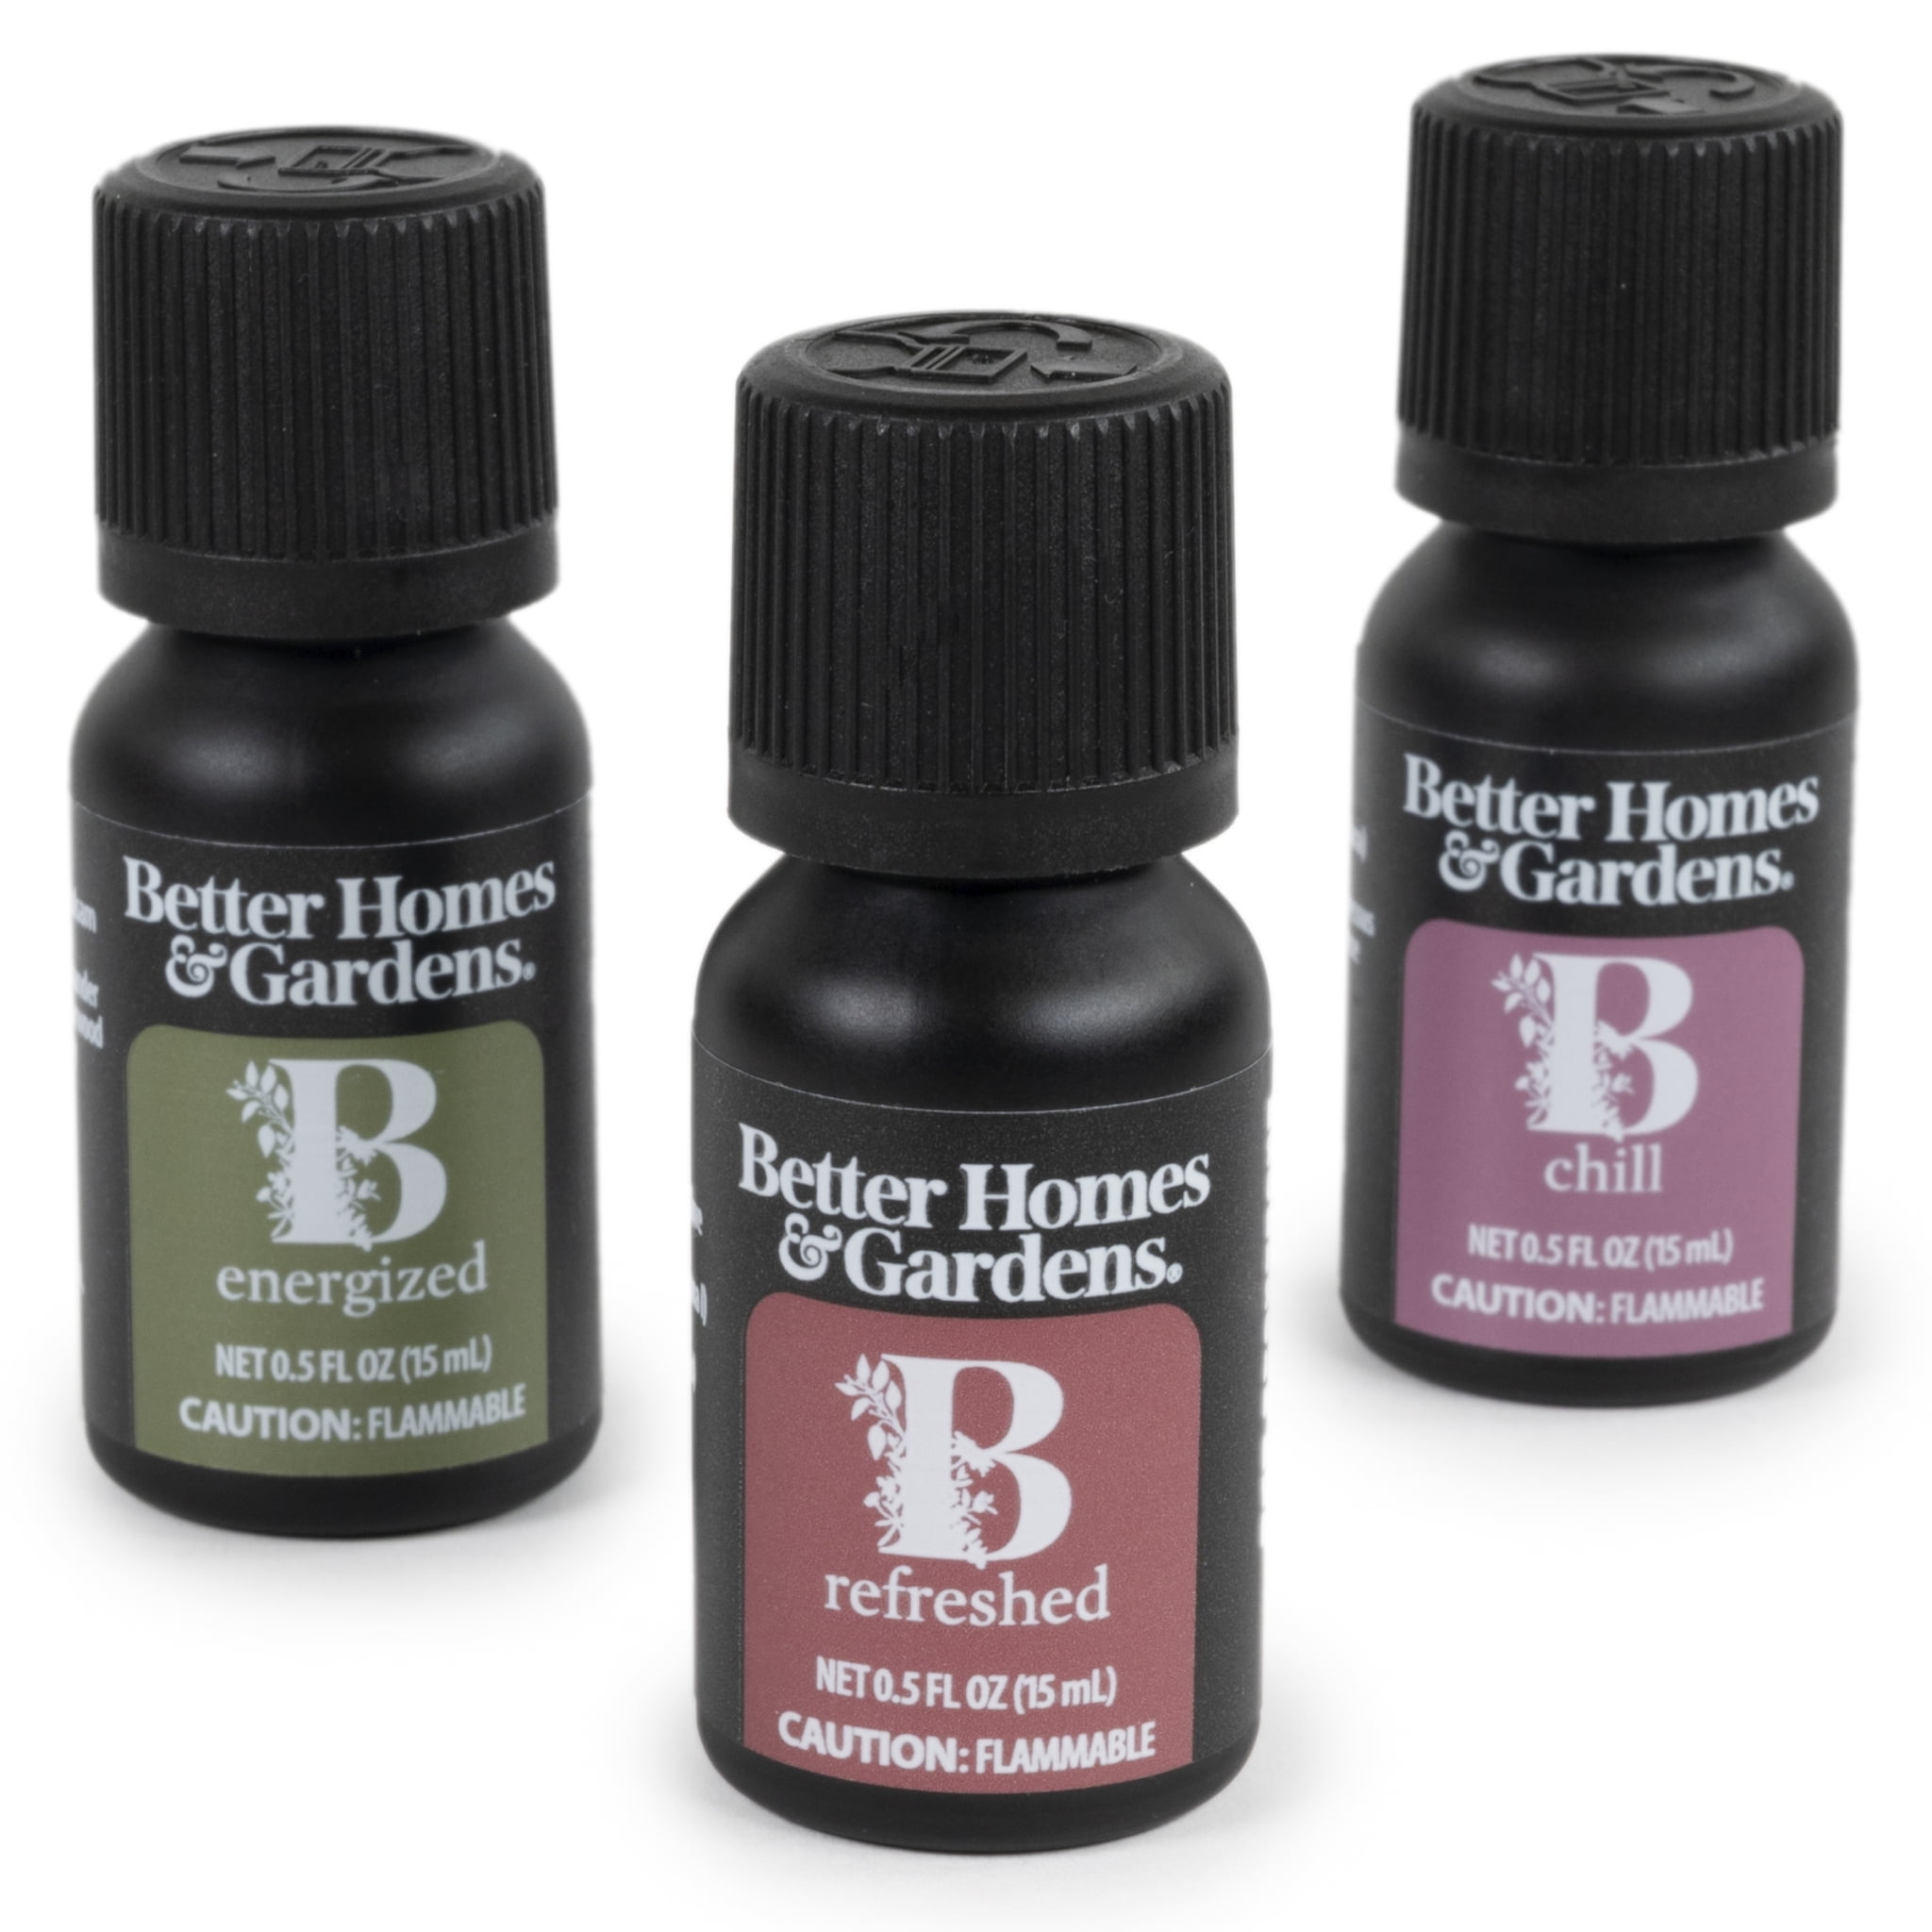 Better Homes & Gardens 100% Pure Essential Oils: Energized, Refreshed, & Chill, 3 x 15ml, Size: 15 ml